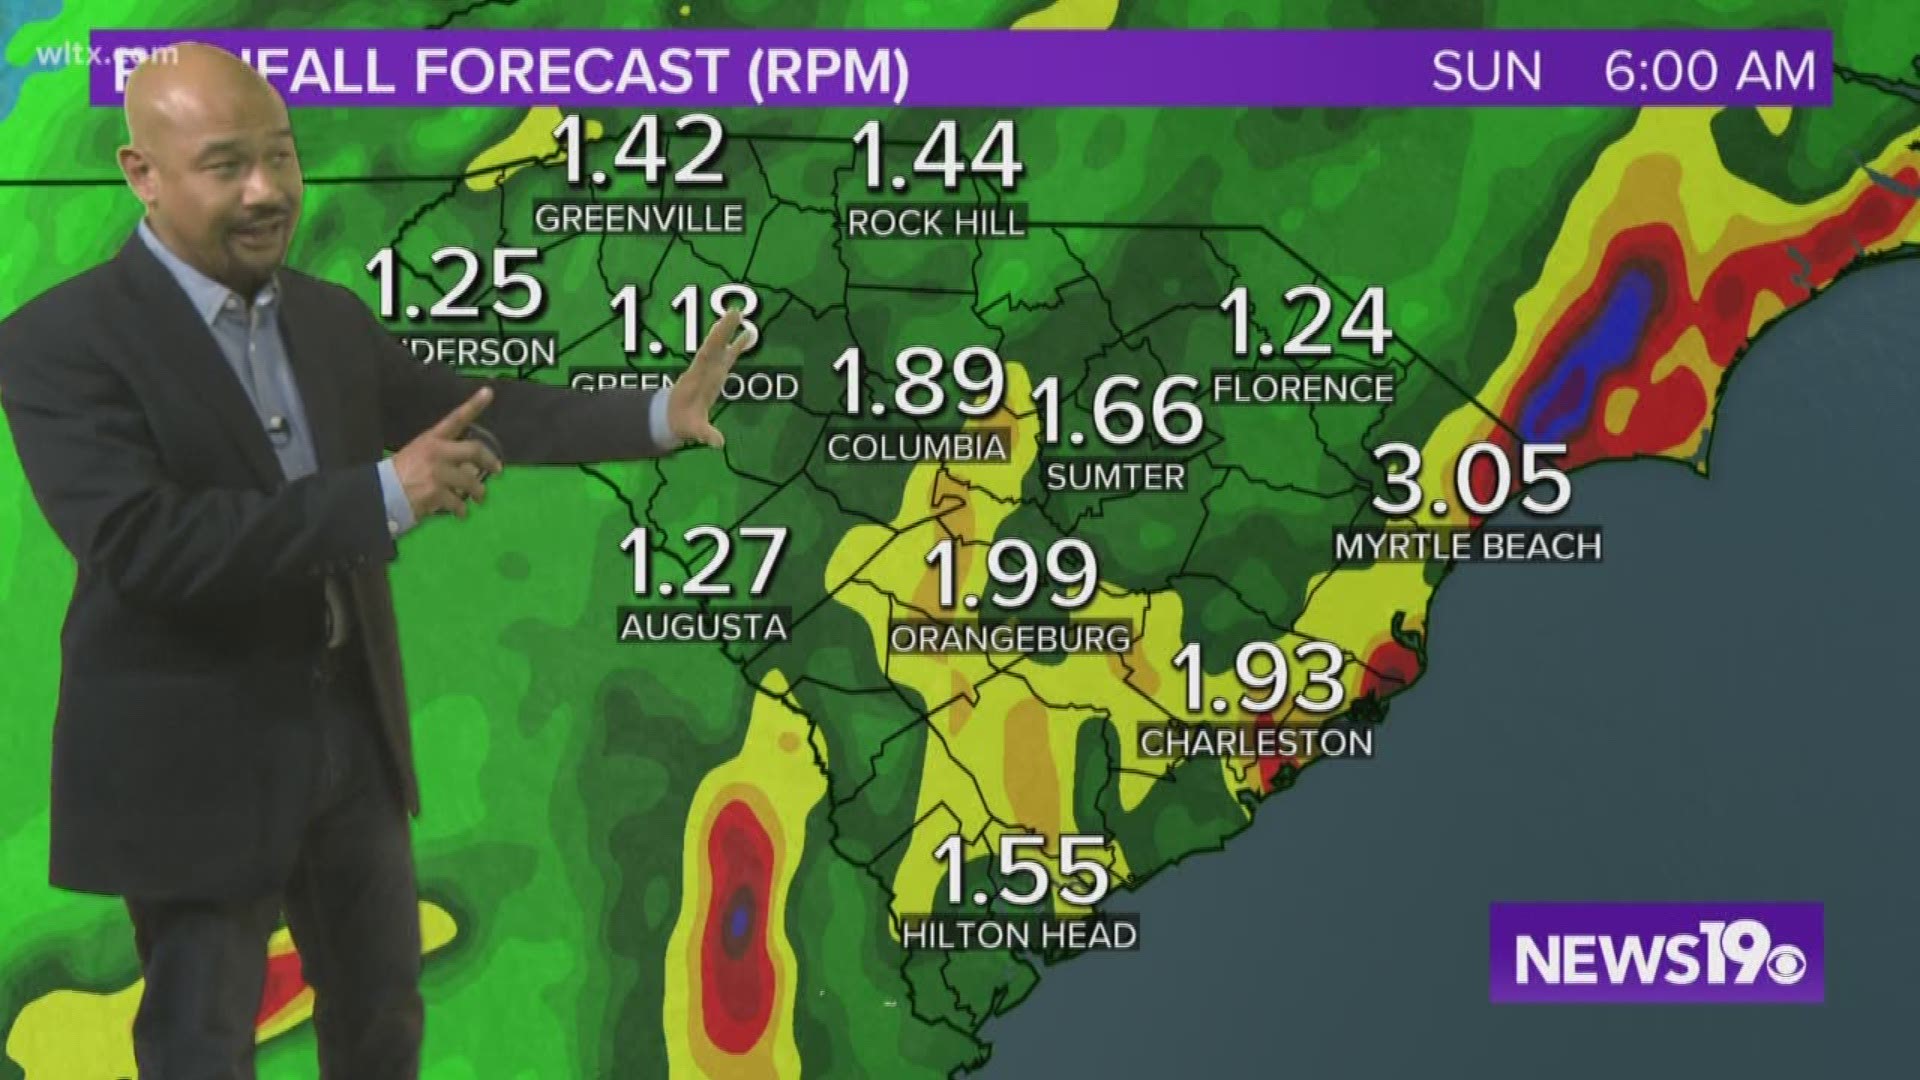 The storm will bring at times heavy rain into the state of South Carolina Saturday and Sunday.